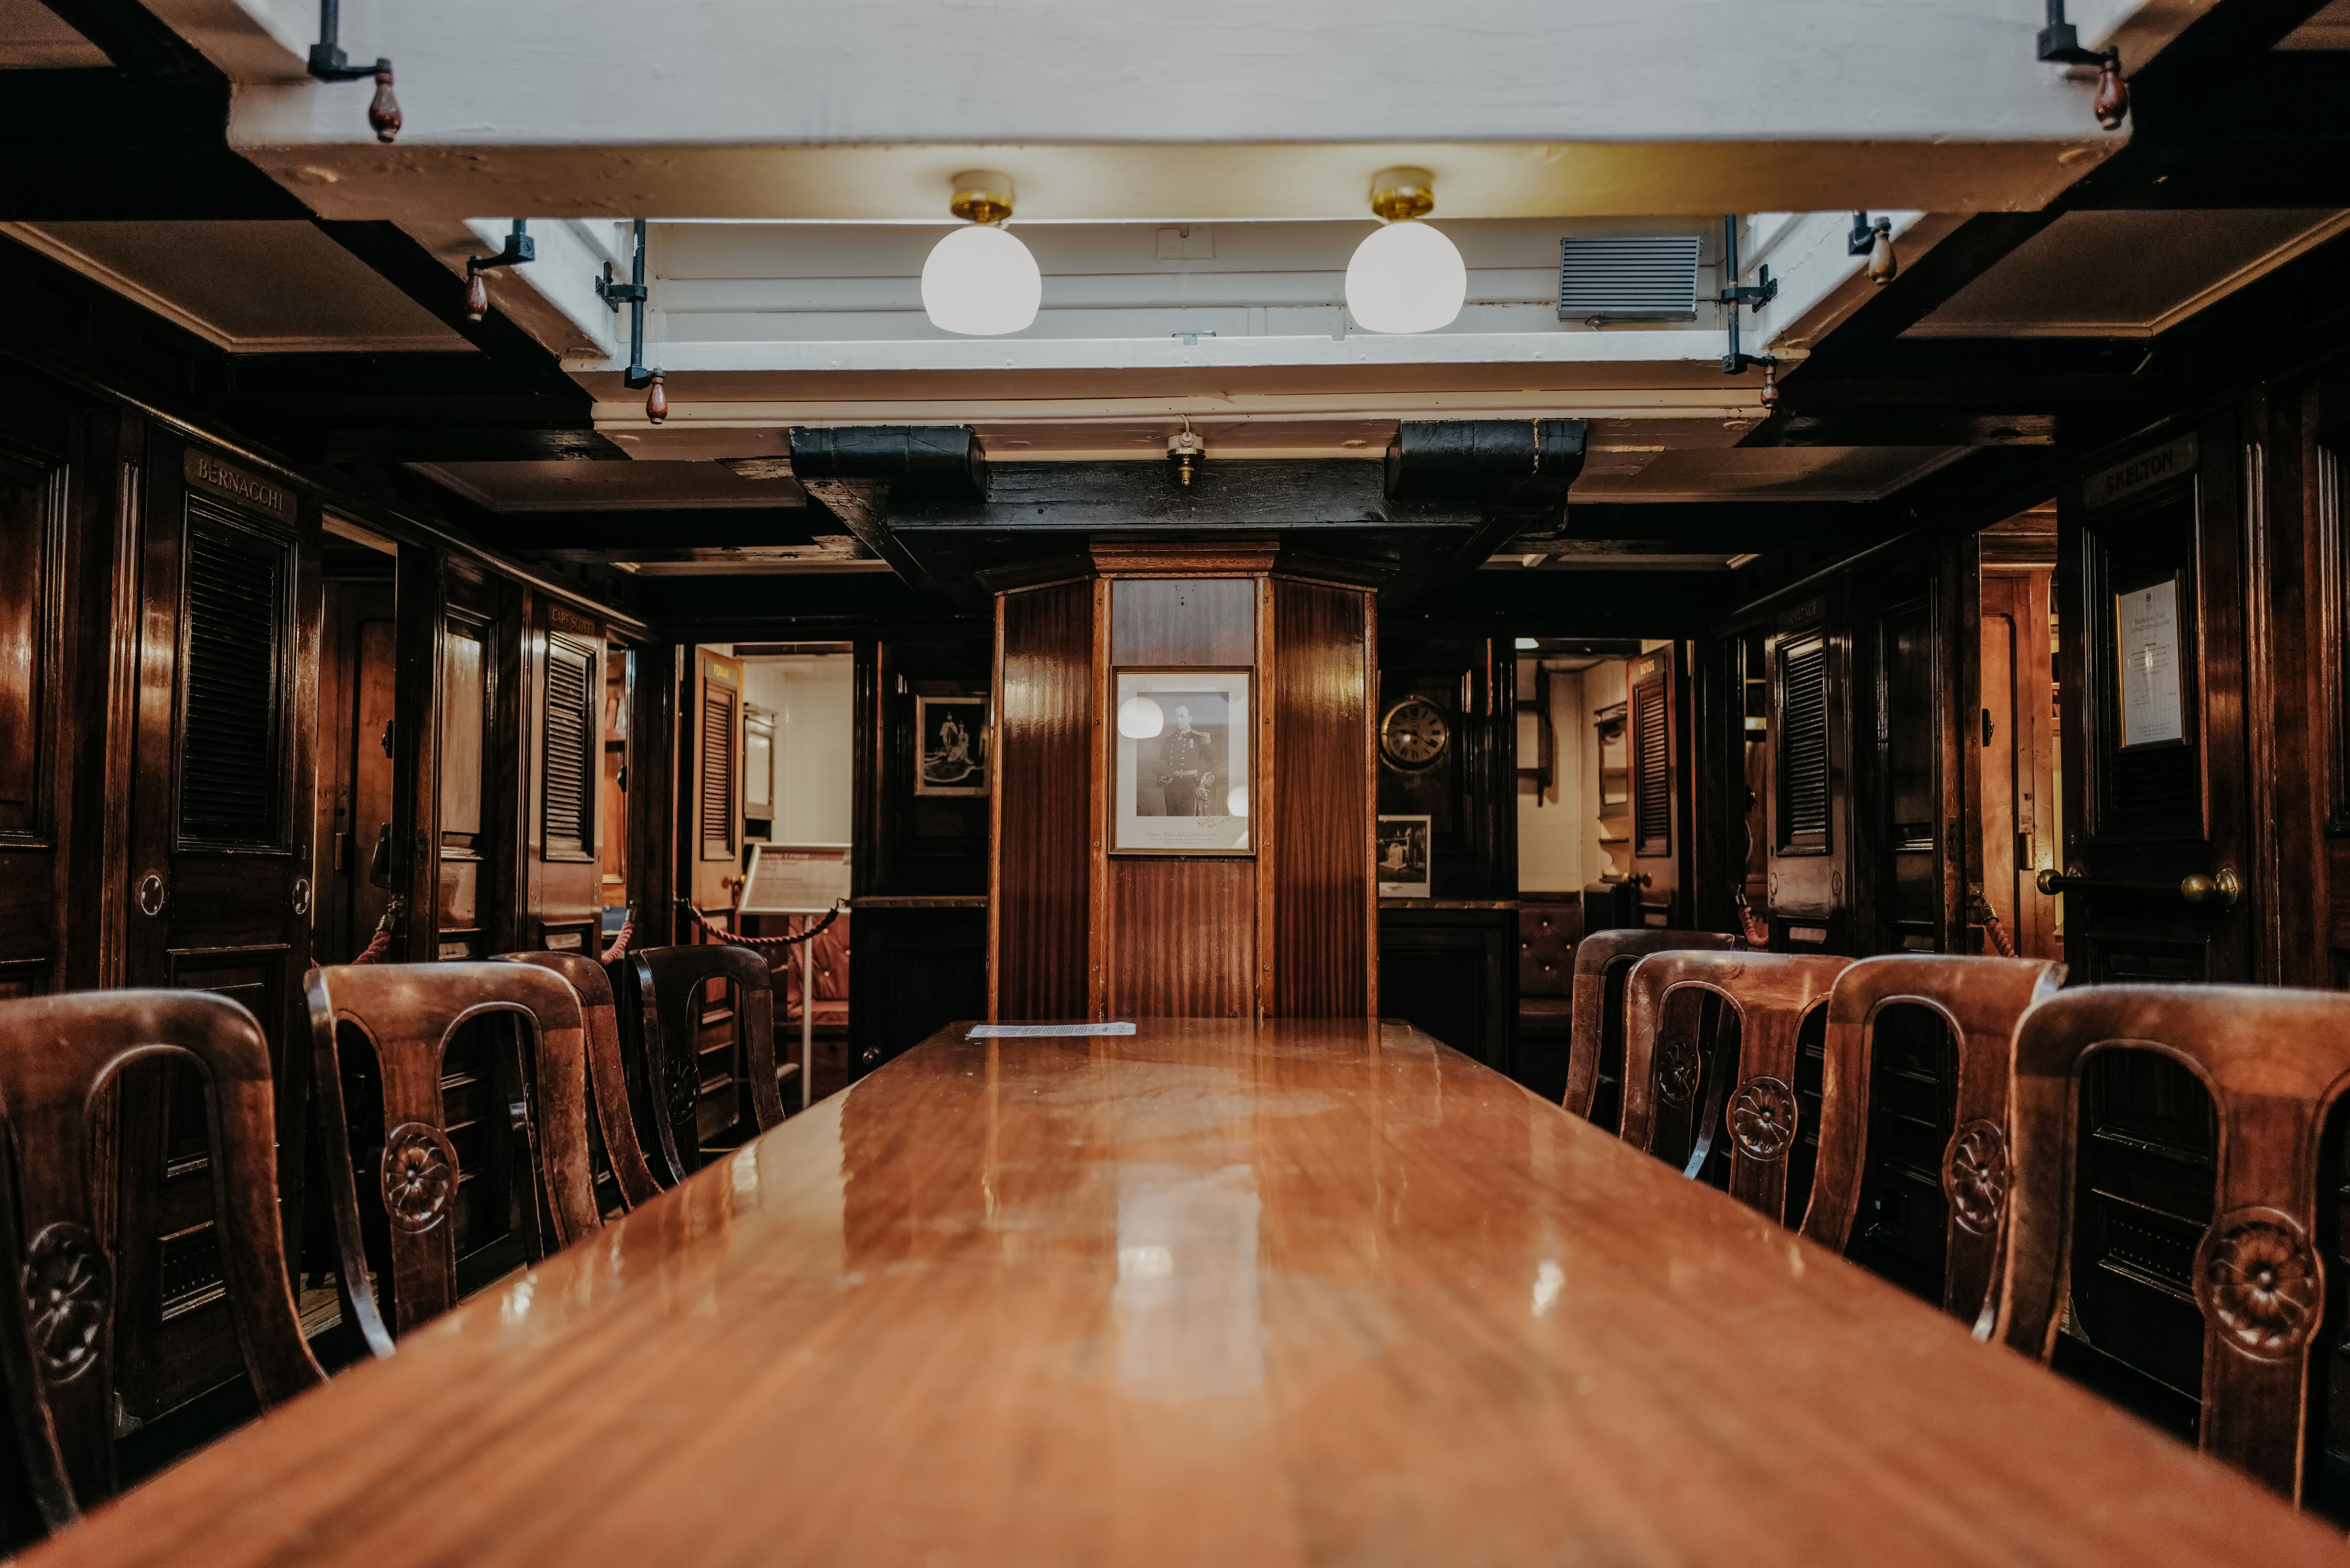 Looking down the mahogany table of RRS Discovery's wardroom. At the end of the table, a black and white portrait of Captain Scott is hung. Wooden chairs line each side of the table. Two round white lamps hang above from white overhead beams.